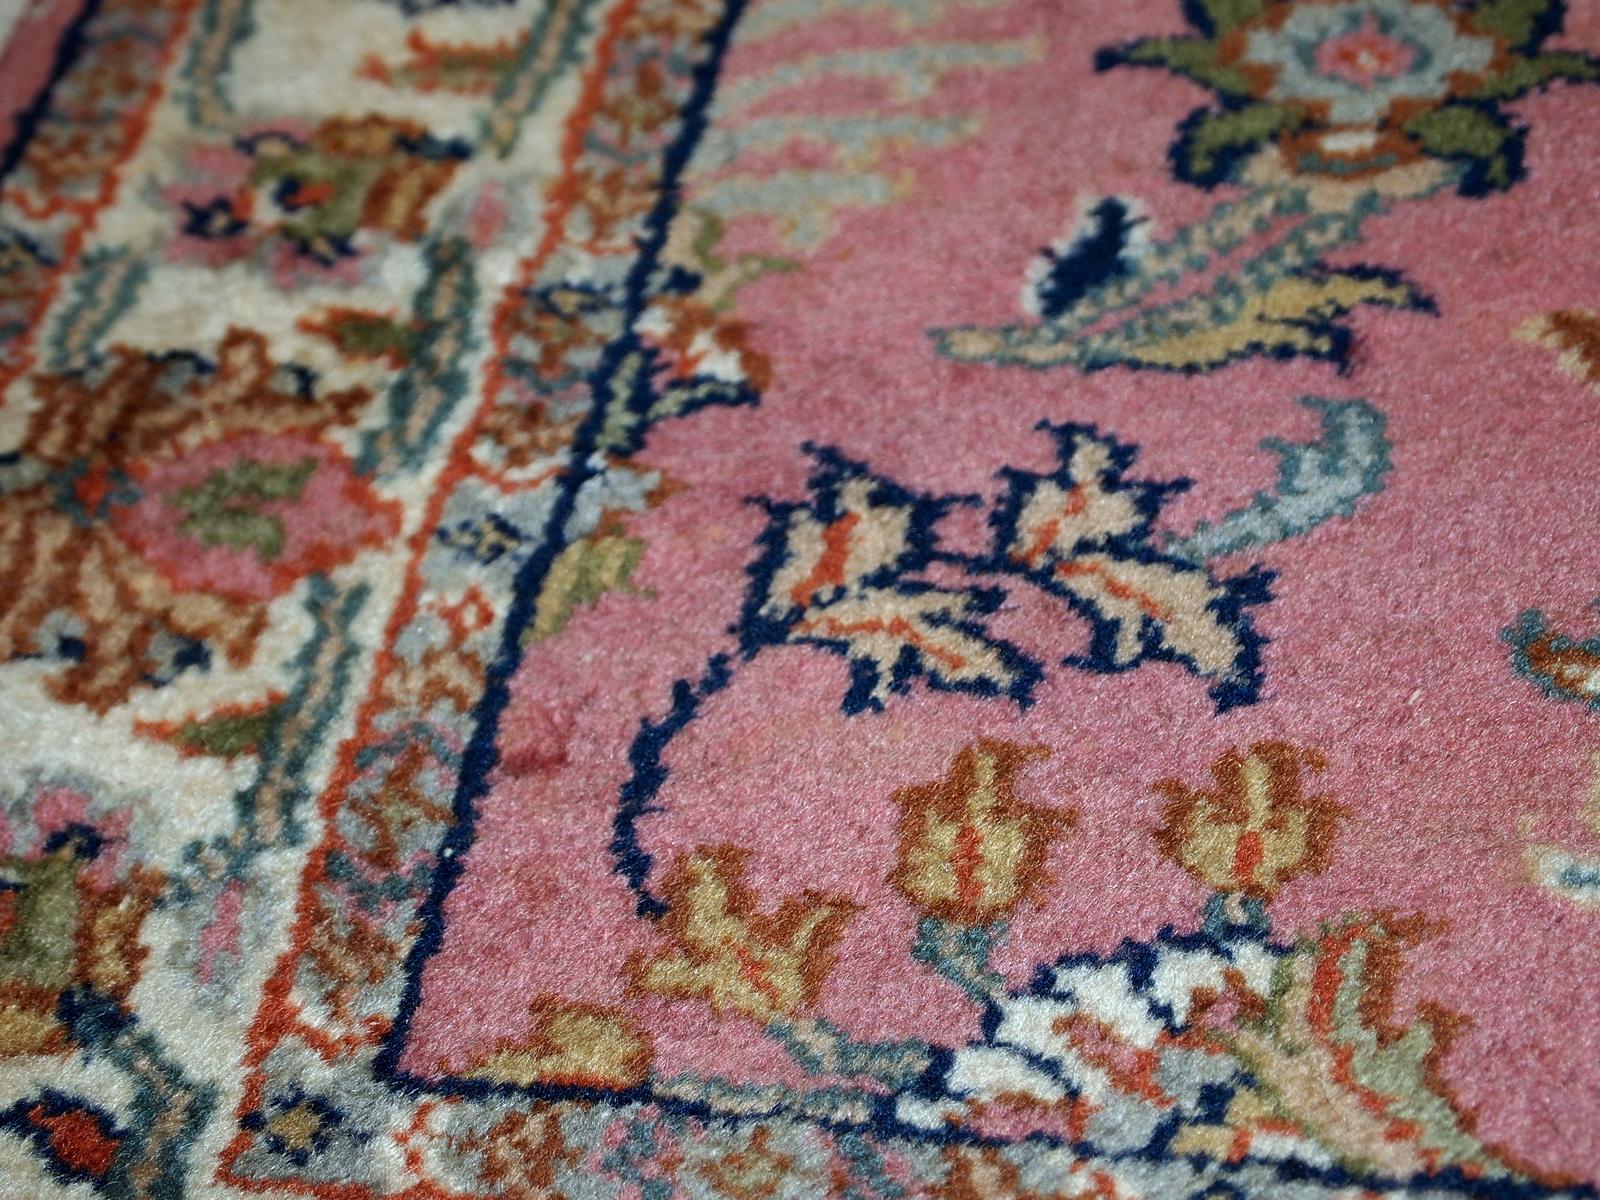 1960s style rug